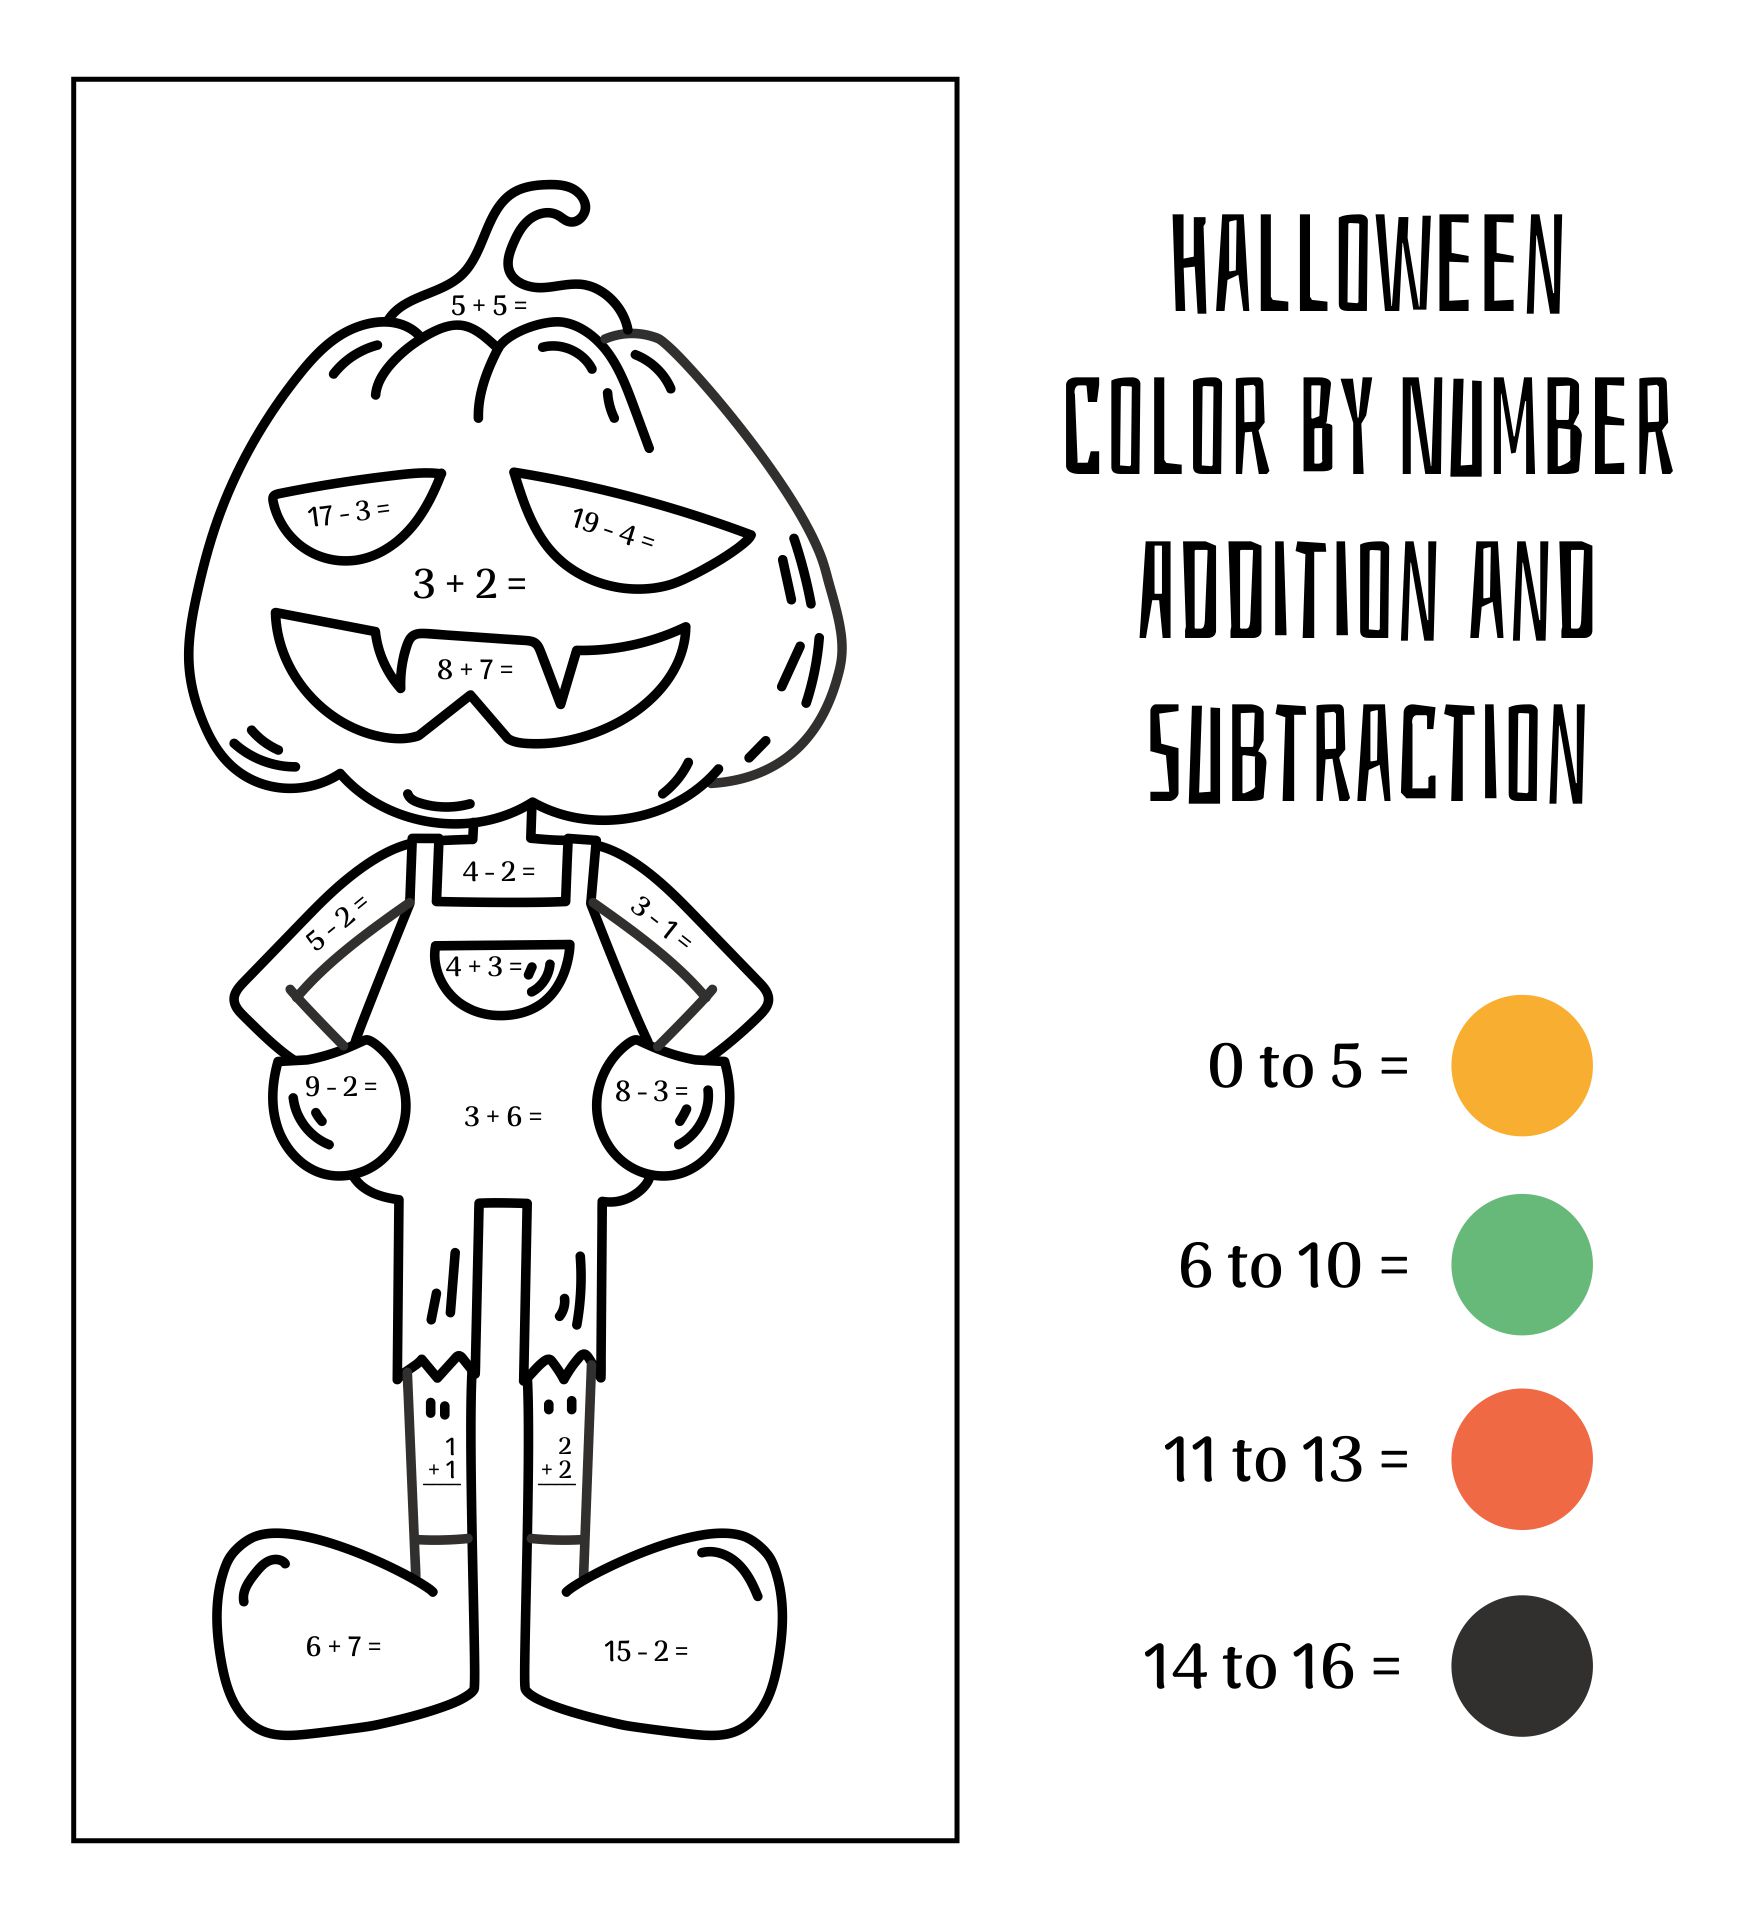 Halloween Color By Number Addition And Subtraction Printable